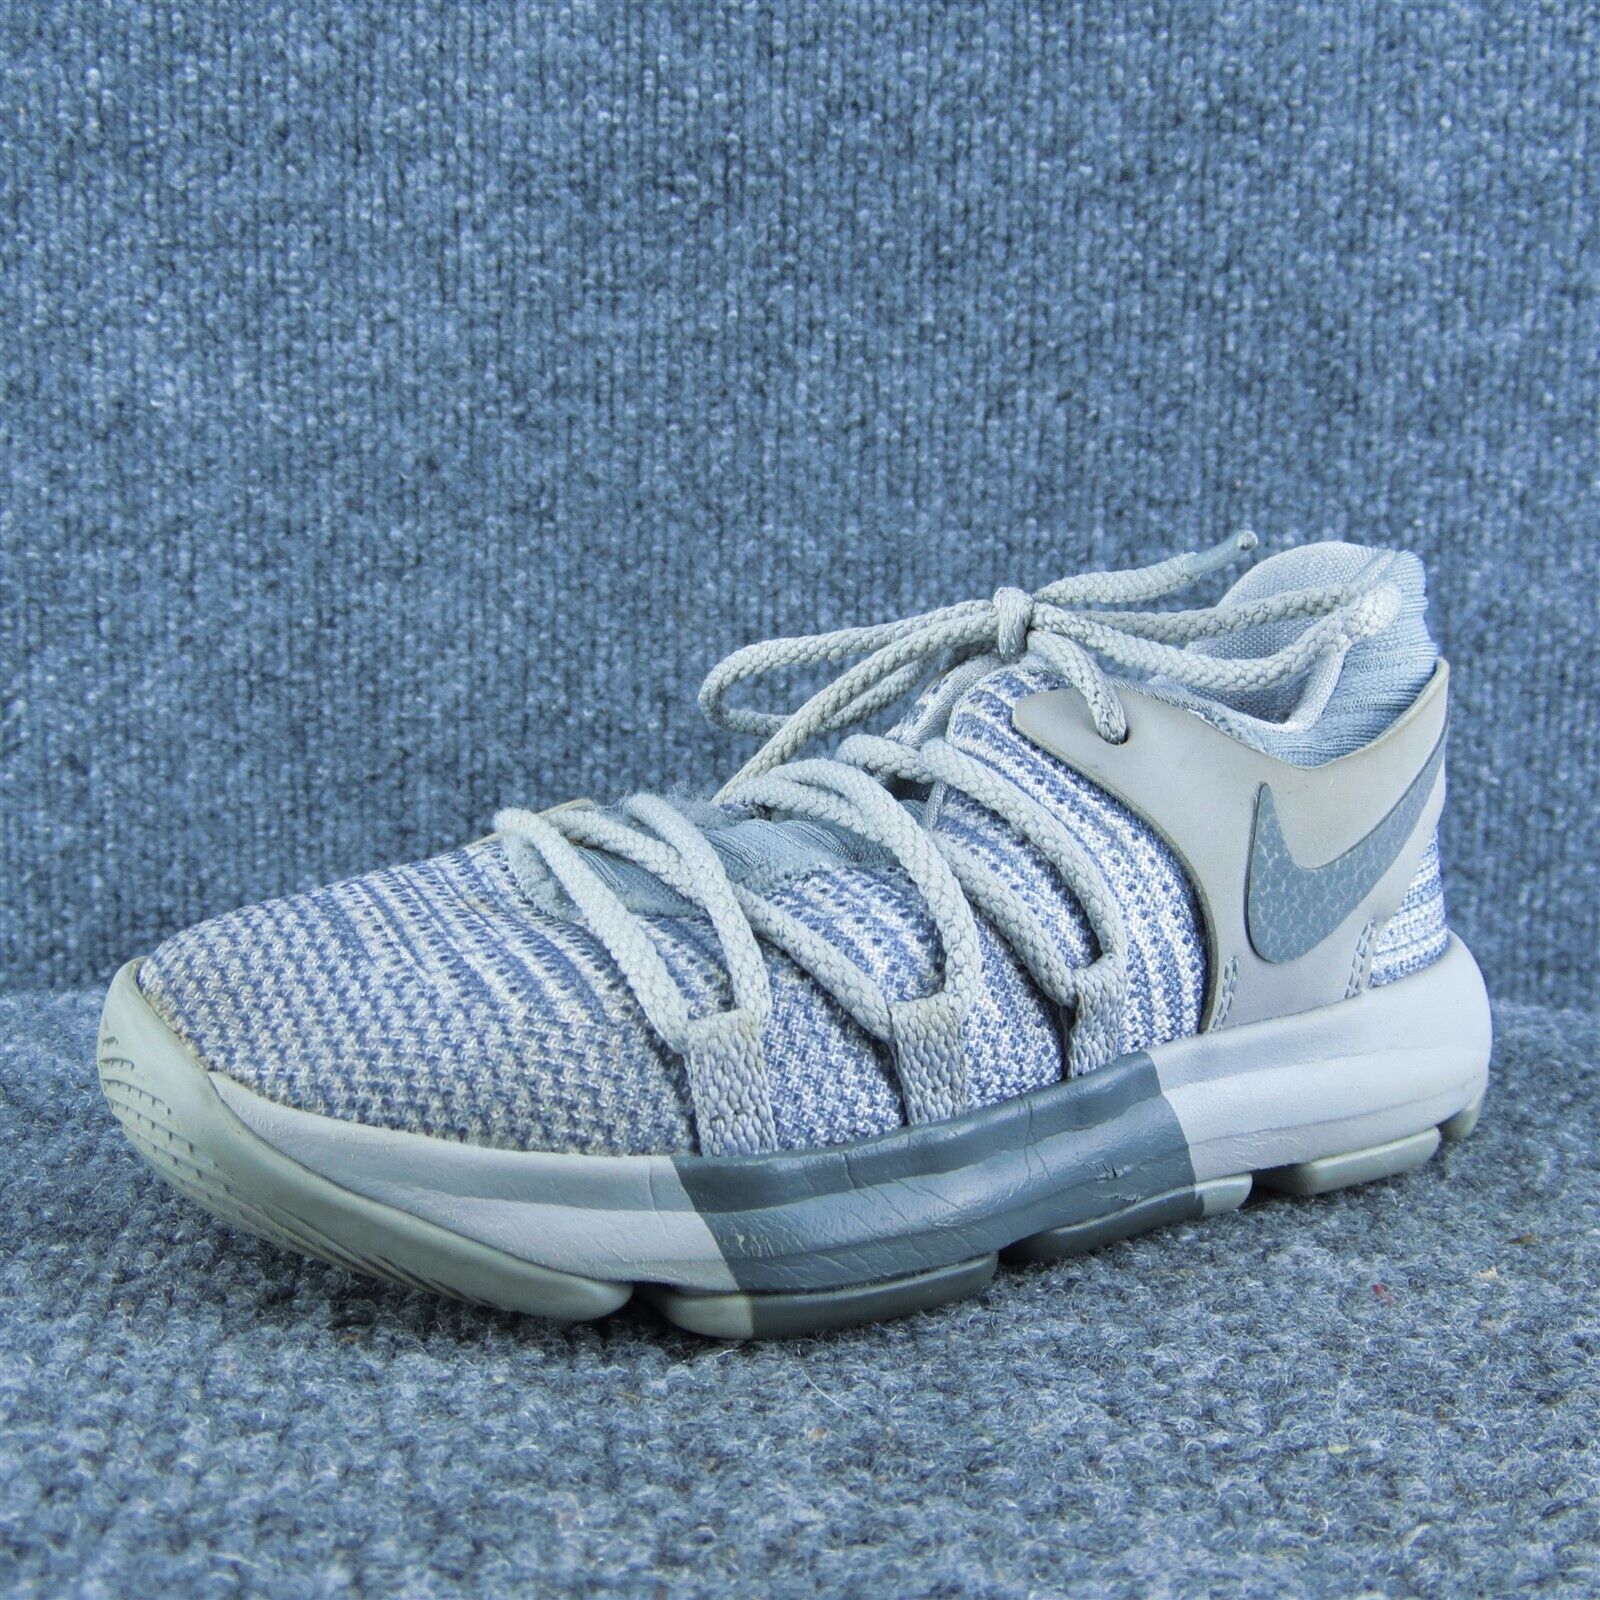 Primary image for Nike Boys Sneaker Shoes Gray Fabric Lace Up Size T 12 Medium